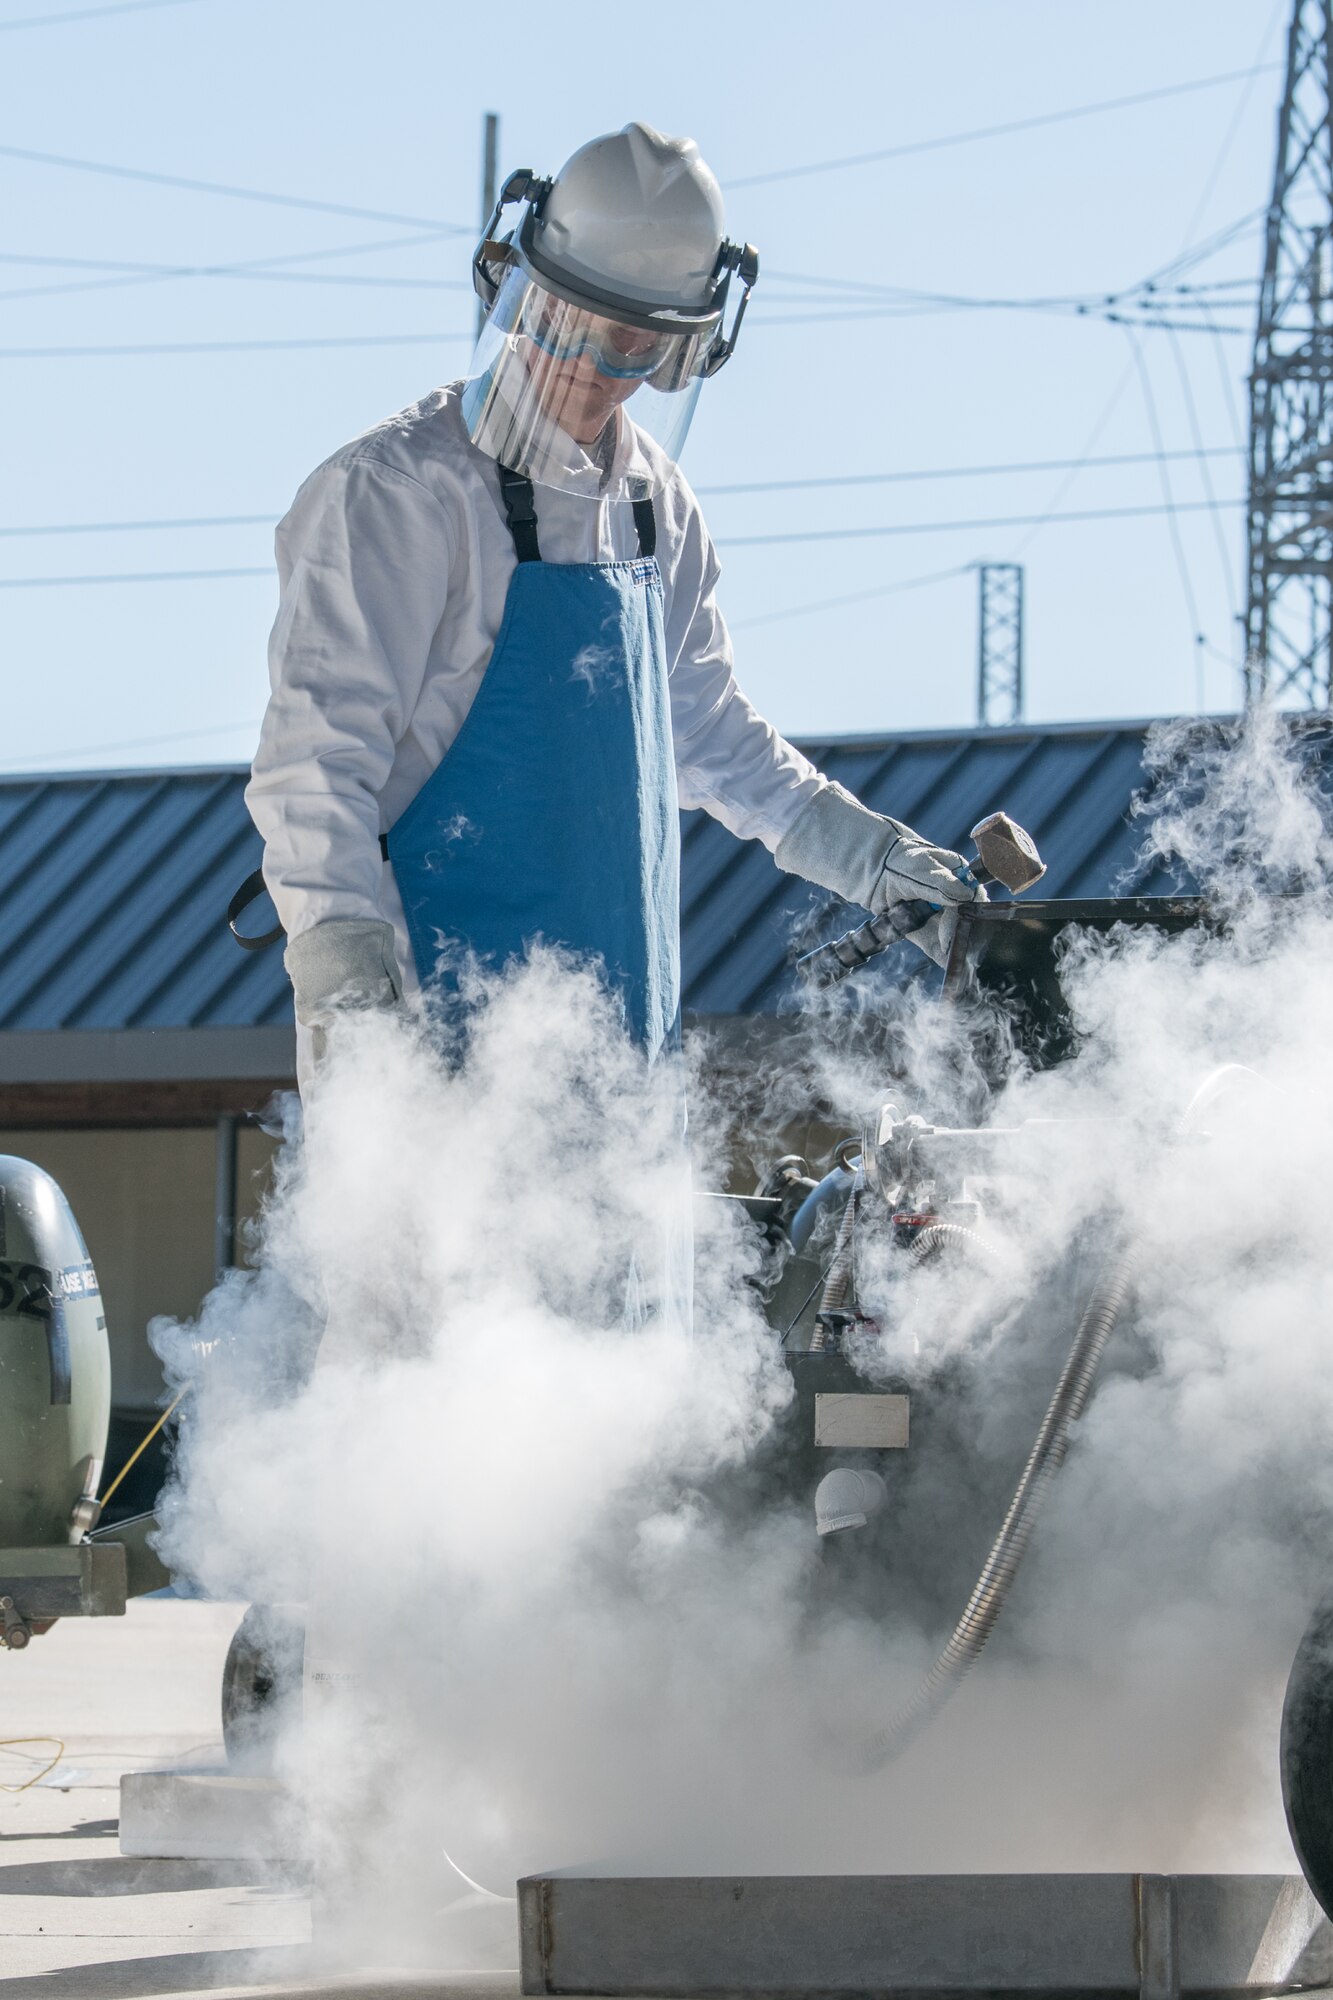 Airman 1st Class Justin Jett, fuels distribution operator, 436th Logistics Readiness Squadron, fills transfer carts with liquid oxygen, Nov. 4, 2019, at Dover Air Force Base, Del. The liquid oxygen will be loaded onto aircraft, where it is converted back to a breathable gaseous form for the aircrews. (U.S. Air Force photo by Mauricio Campino)